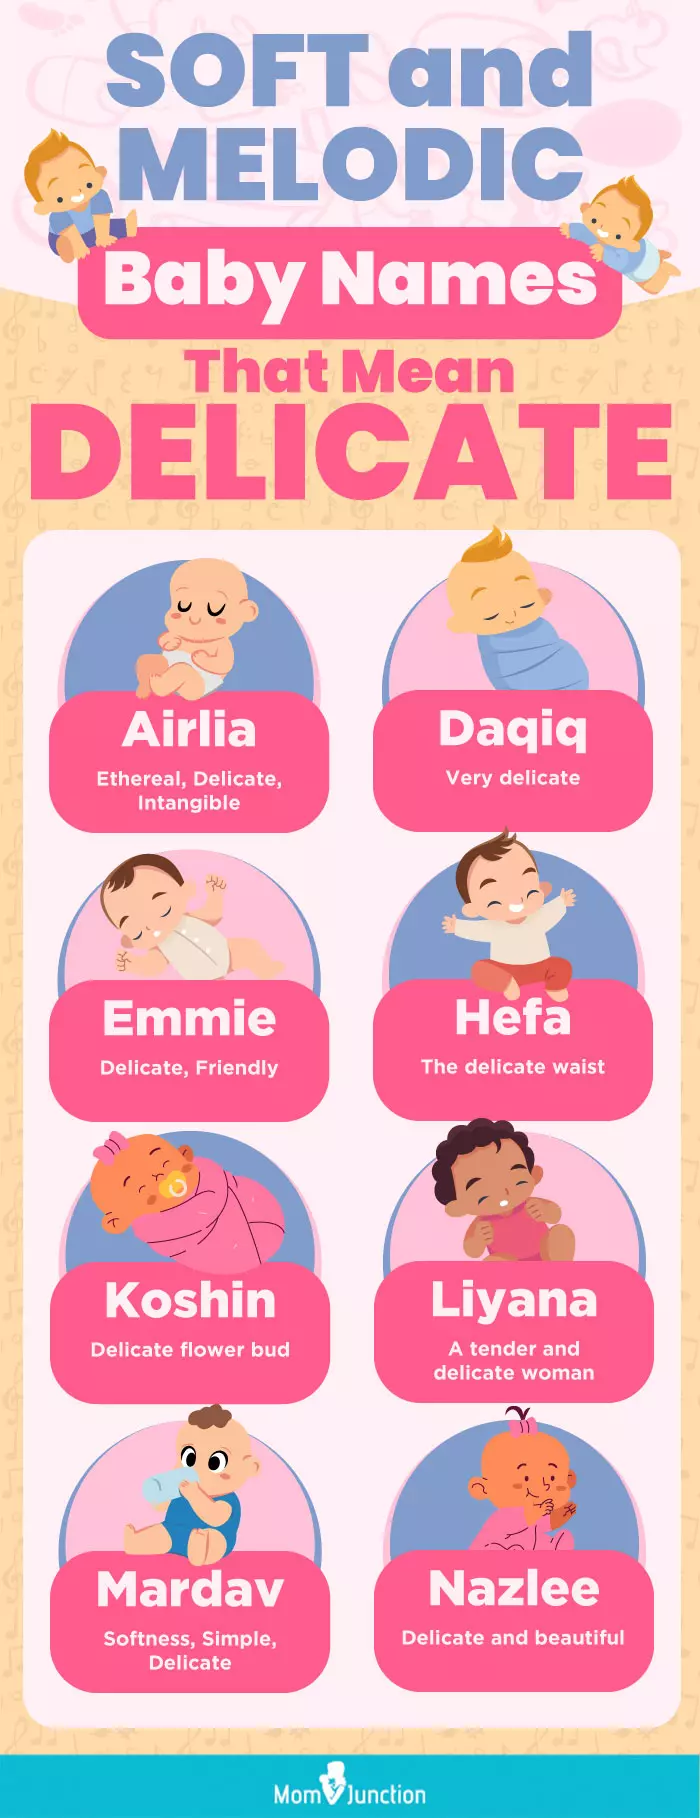 soft and melodic baby names that mean delicate (infographic)